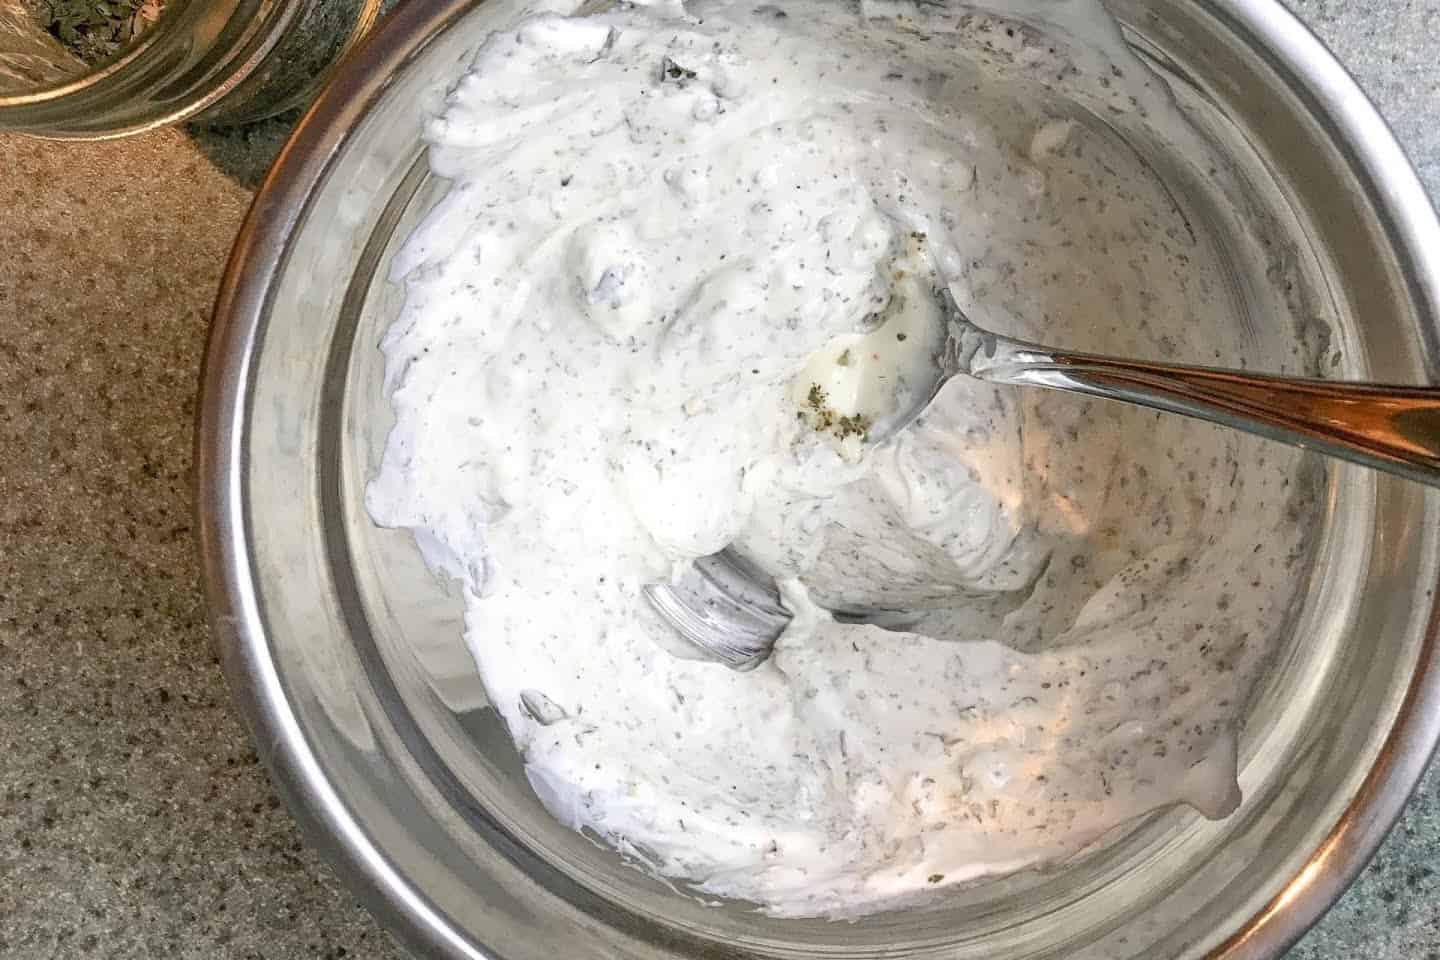 Blended Mayonnaise, Sour Cream and Ranch Seasoning